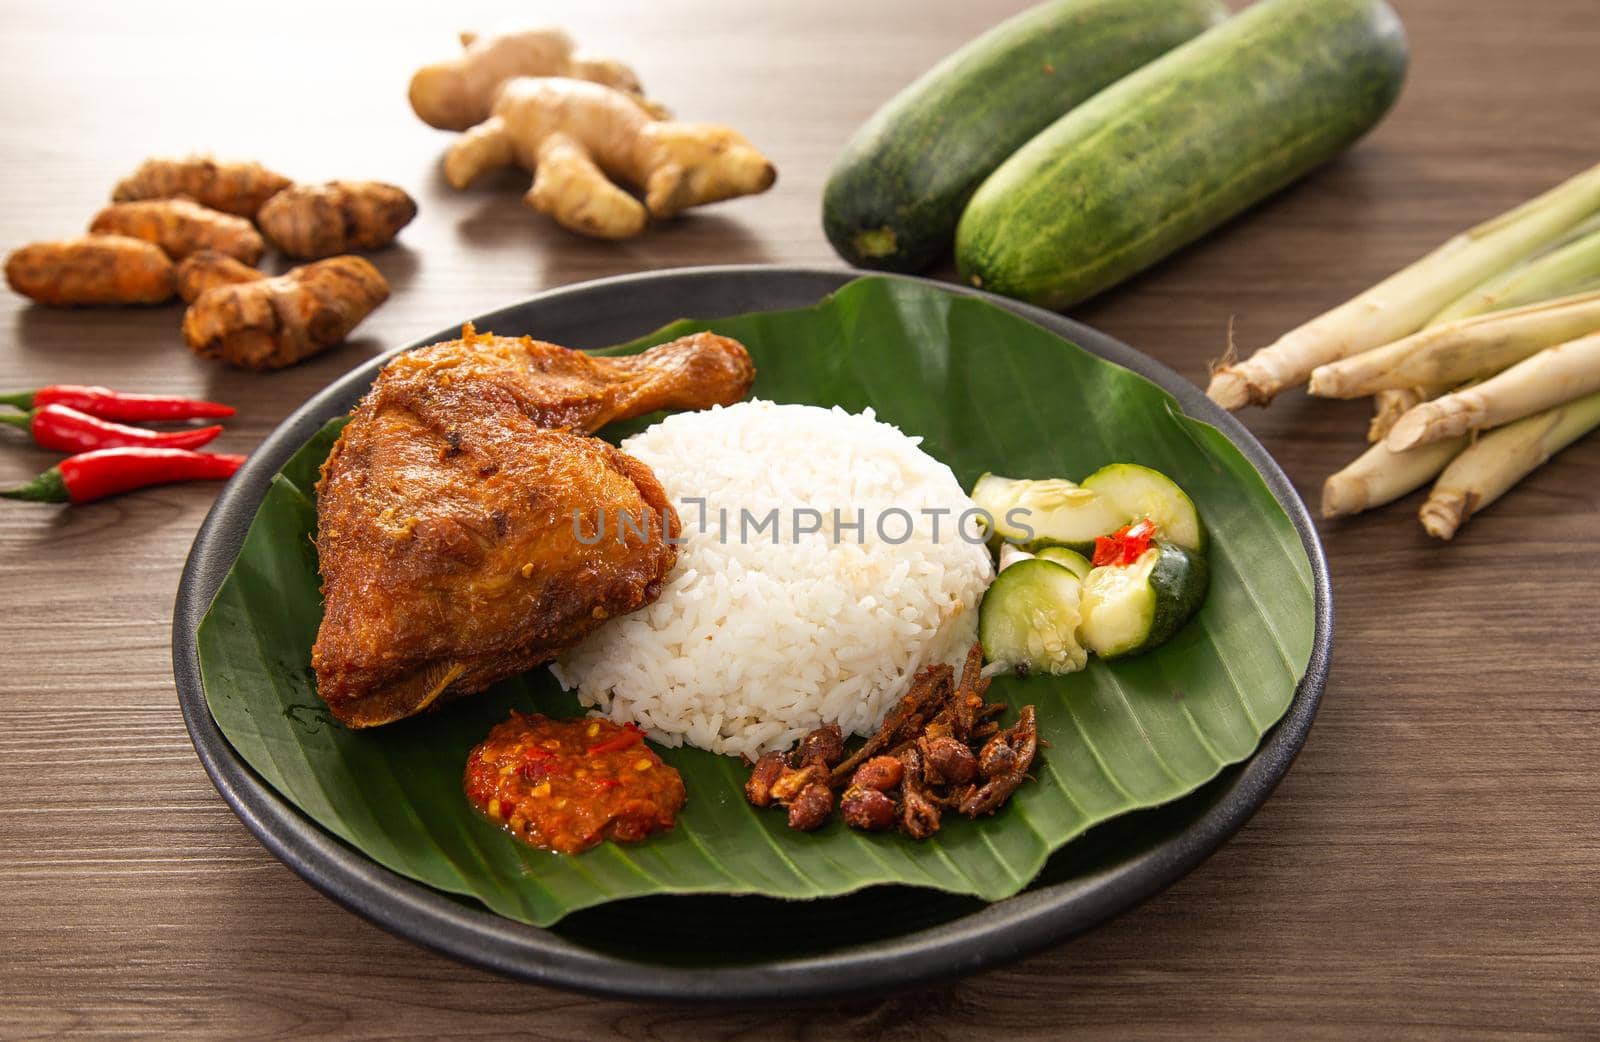 Nasi Kukus is usually comprising freshly steamed rice, crispy fried chicken, sambal belacan, acar and a curry gravy